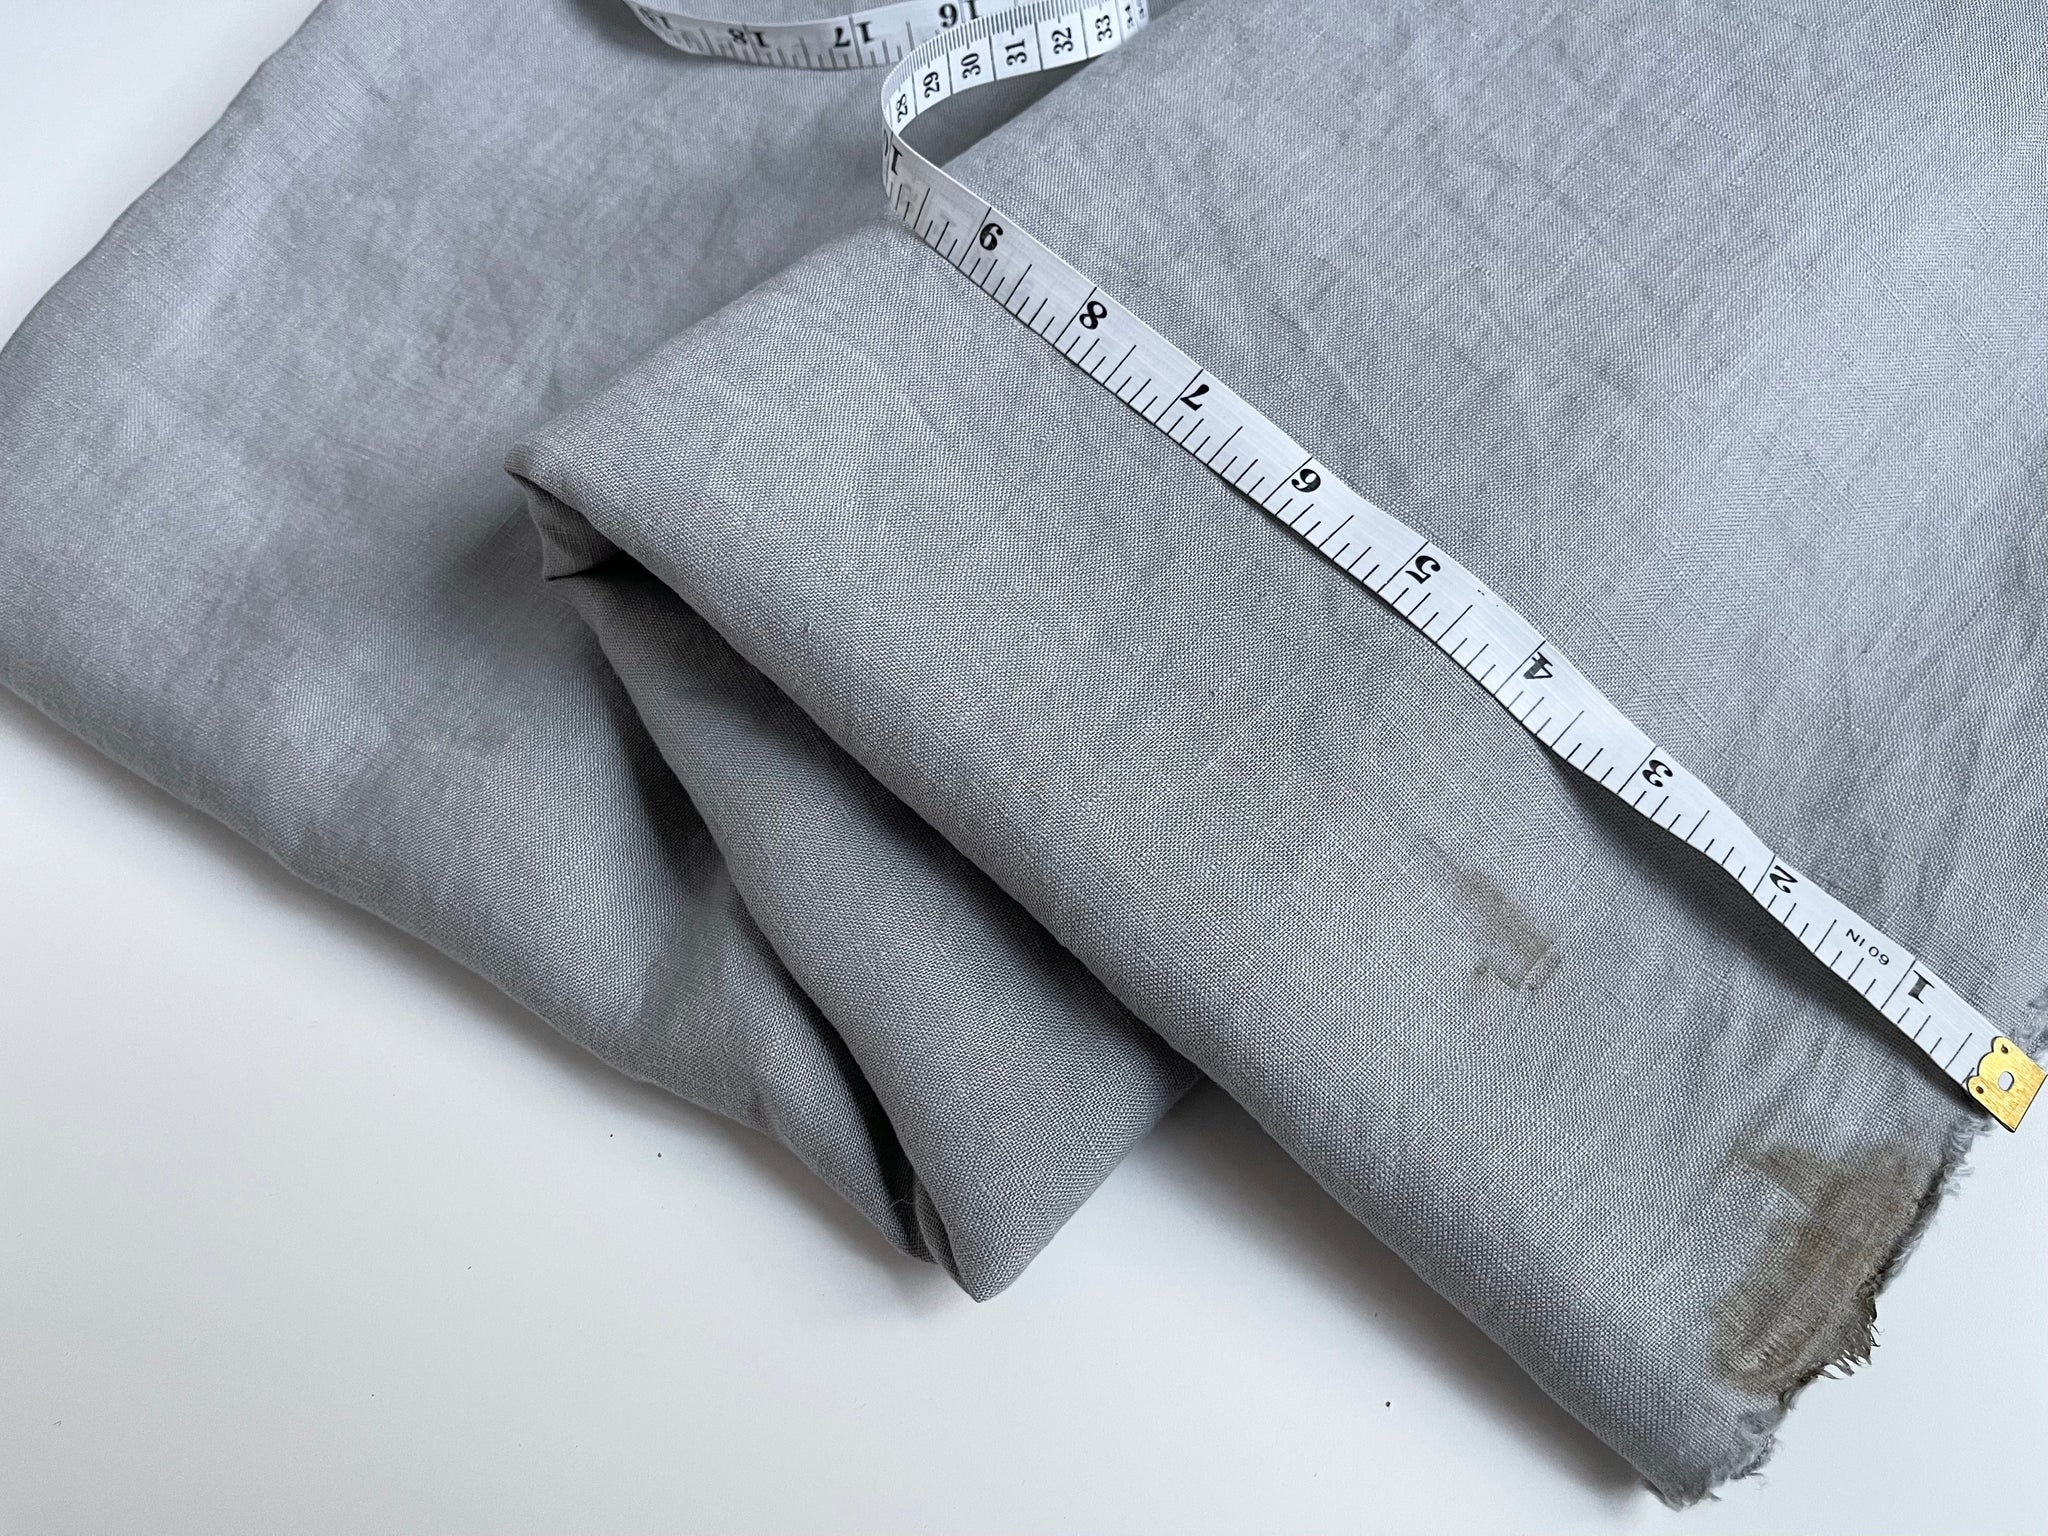 Linen Fabric Remnants - grey - 1 cut 2.5 yards - small spots along selvage